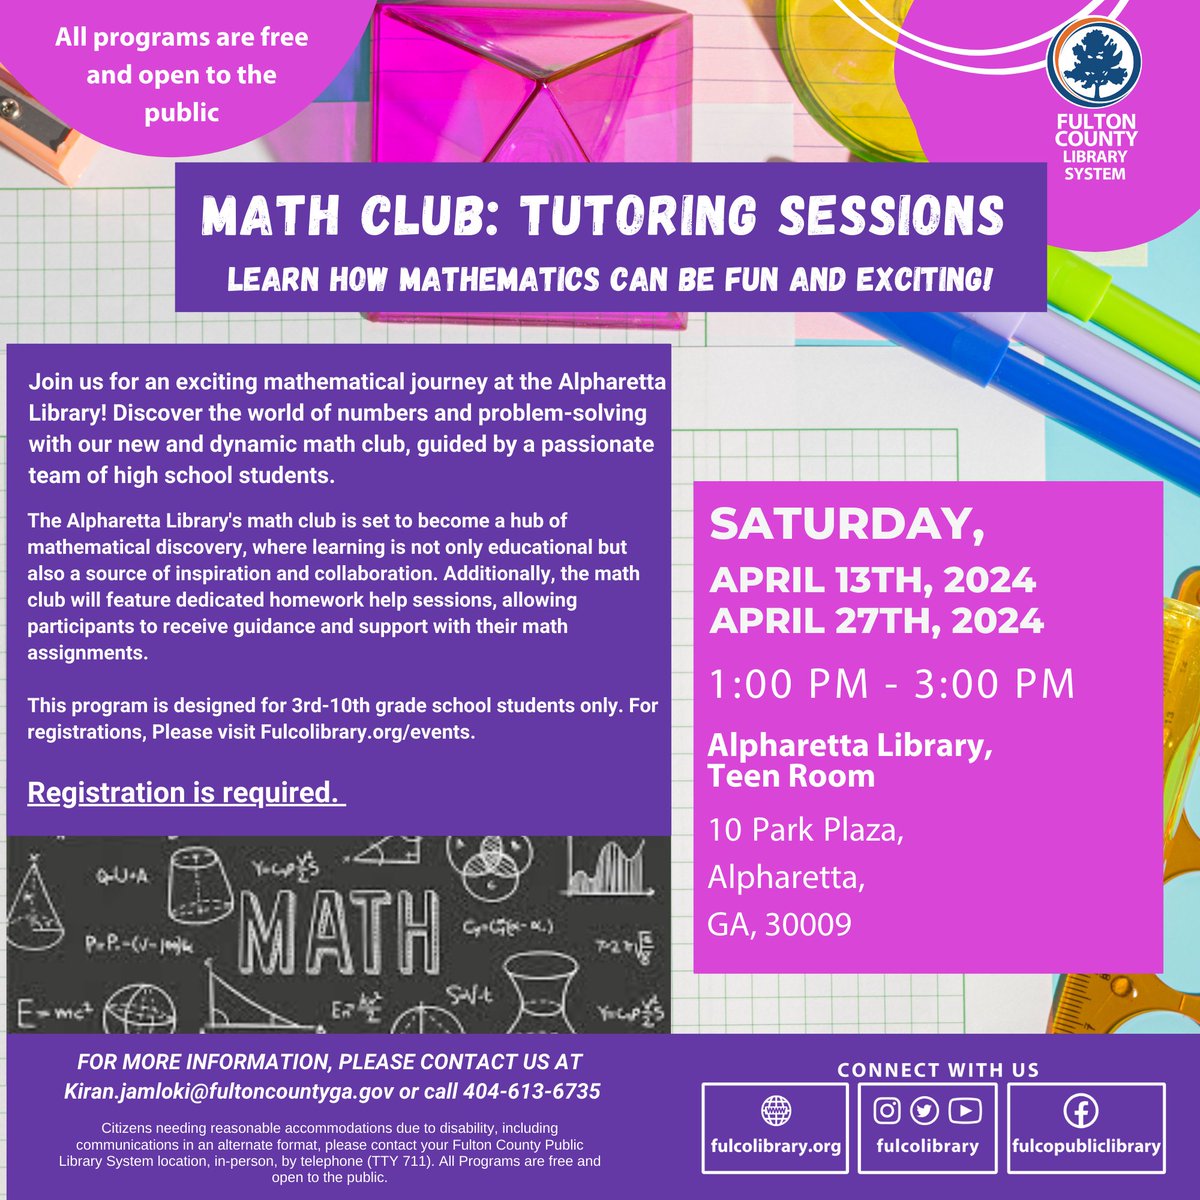 Join our math club at Alpharetta Library! Discover numbers and problem-solving with our dynamic club led by passionate high school students. Designed for students from 3rd to 10th grade.
tinyurl.com/2u9uzhxk
April 13 and April 27, 2024, from 1 pm to 3 pm. 

#math #tutoring